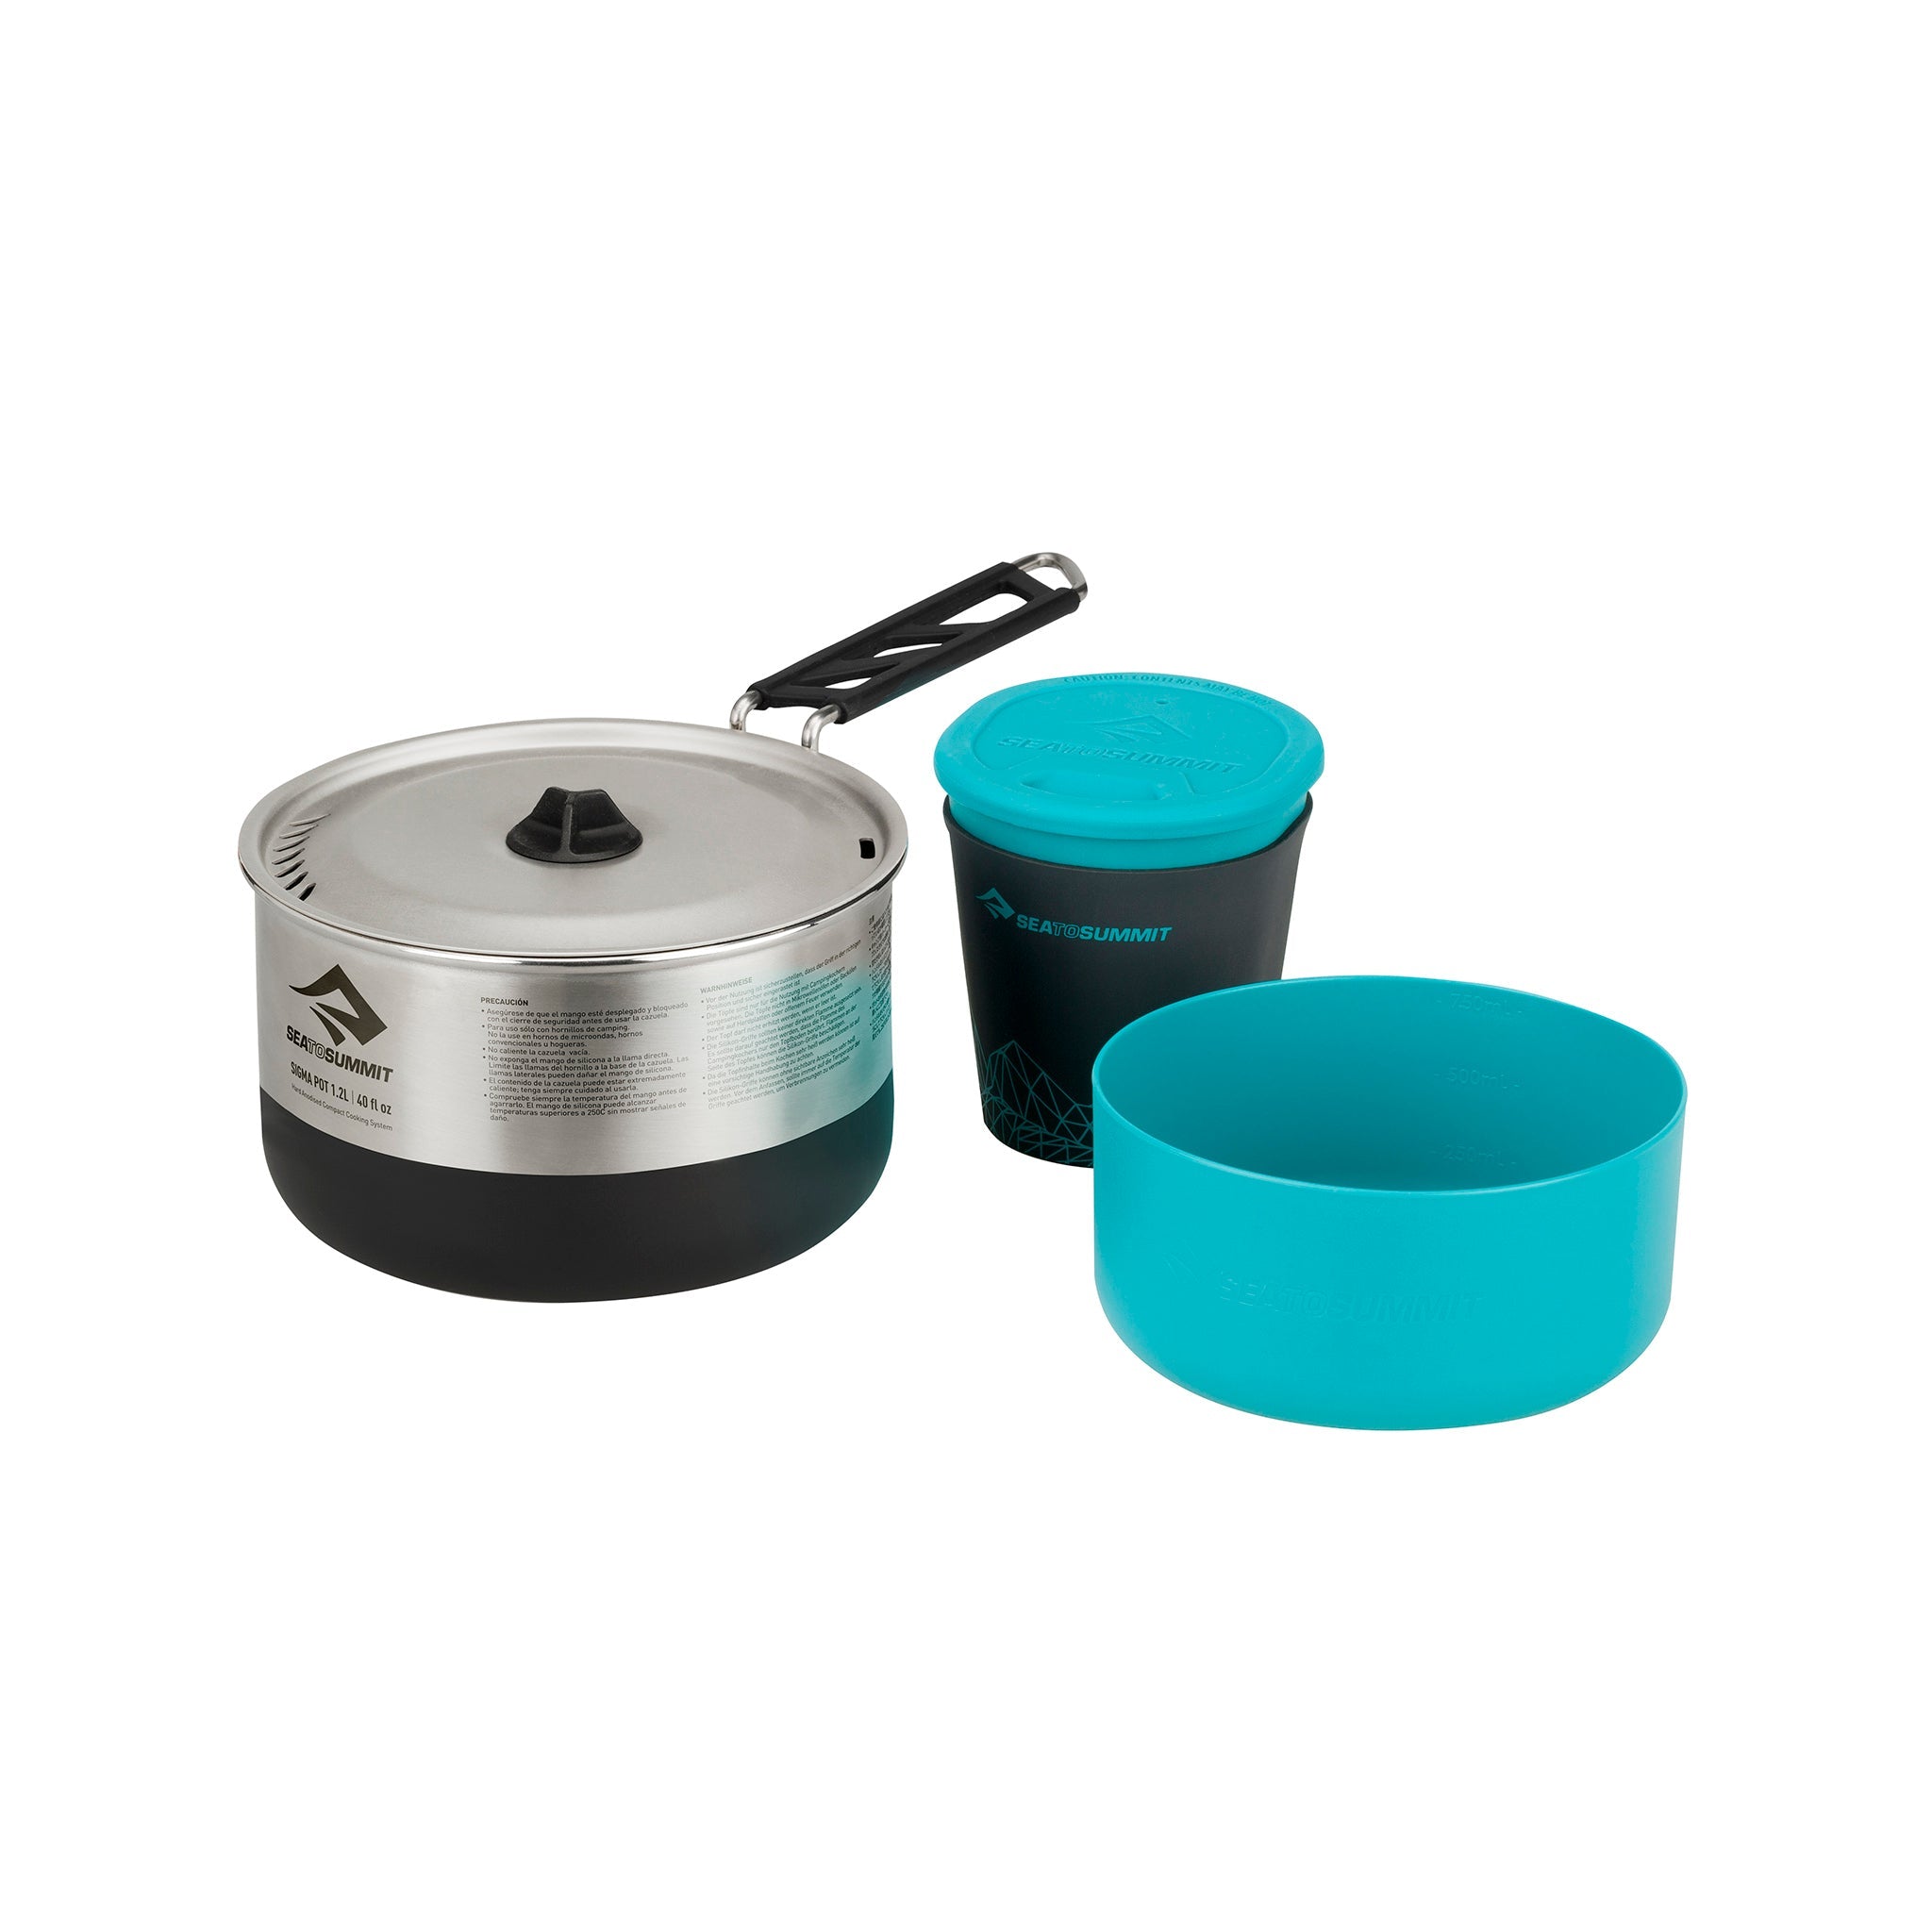 SEA TO SUMMIT SIGMA SET 2.0 STAINLESS STEEL POTS SET CAMP COOKWARE 